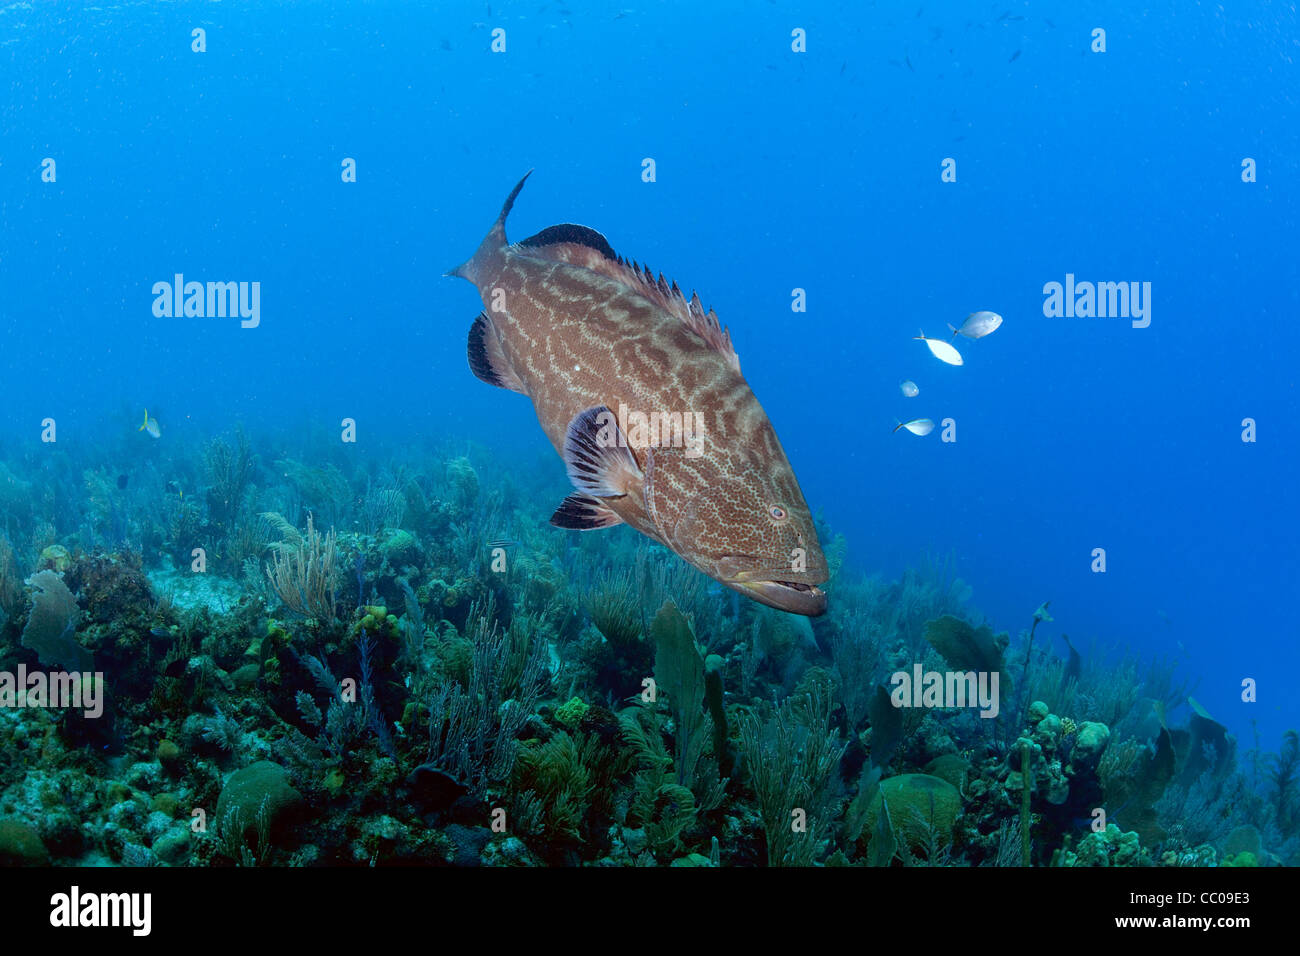 A larger grouper on a coral reef off the coast of Cuba. Stock Photo